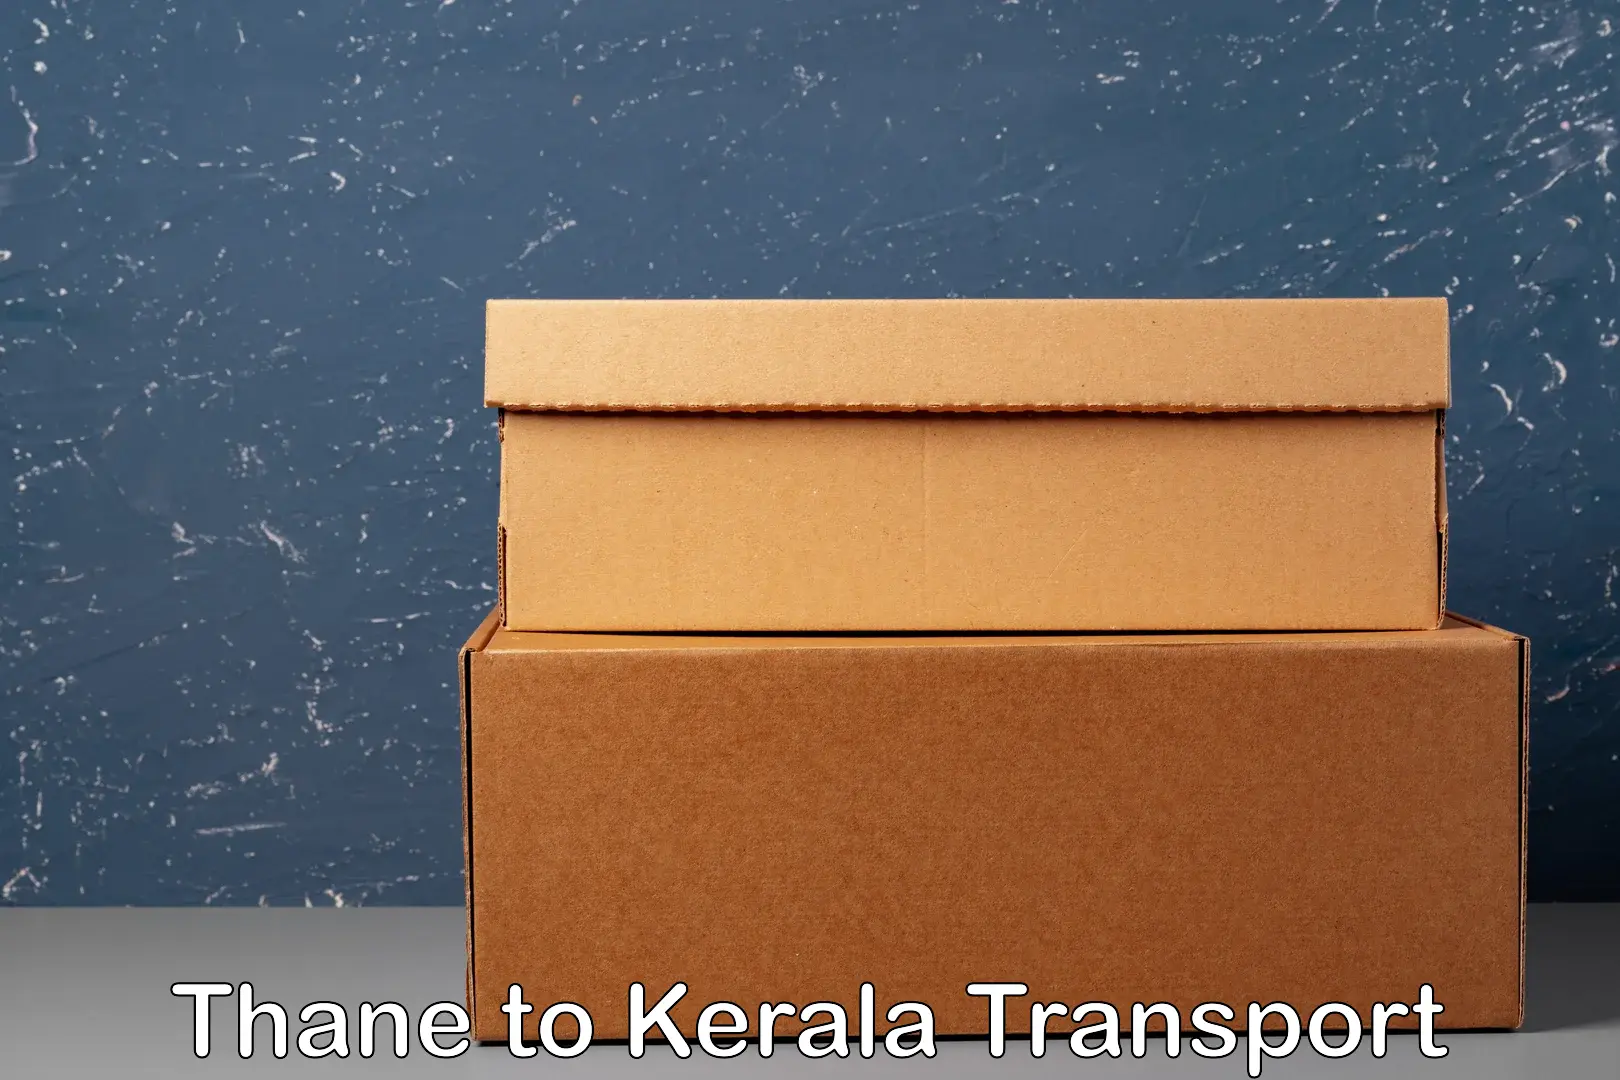 Truck transport companies in India Thane to Kerala